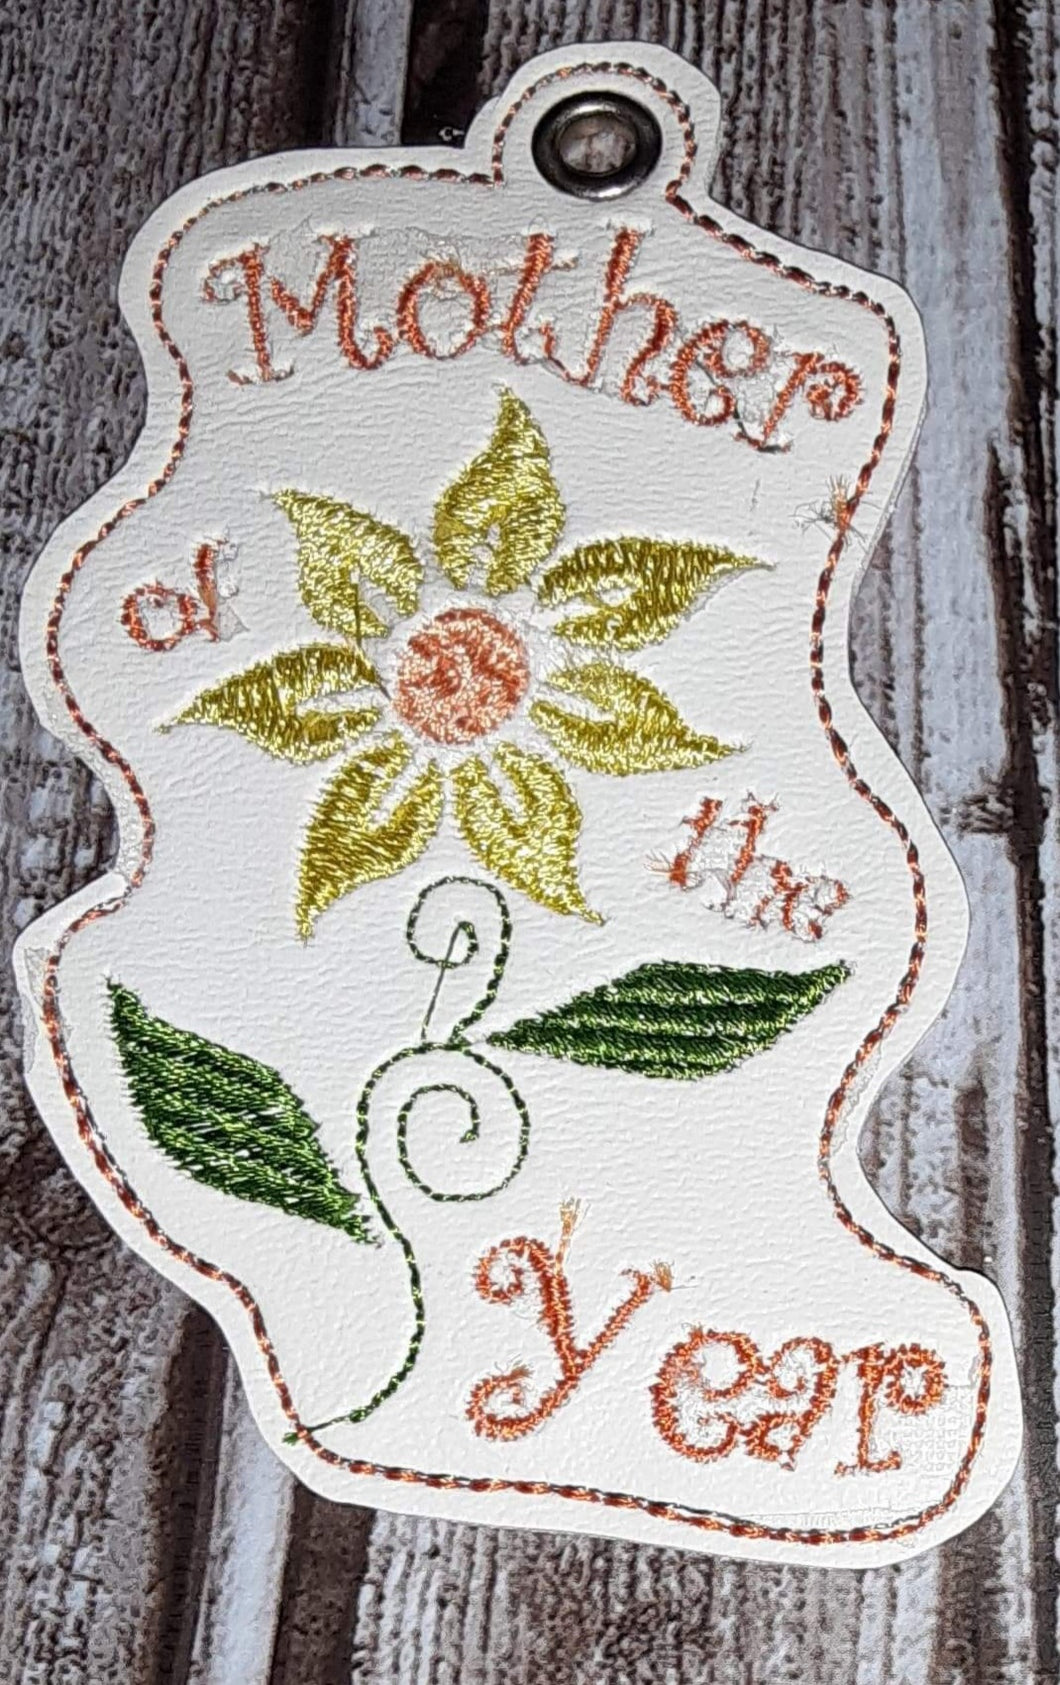 Mother of the Year 4x4 Keyfob - ITH Digital Embroidery Design